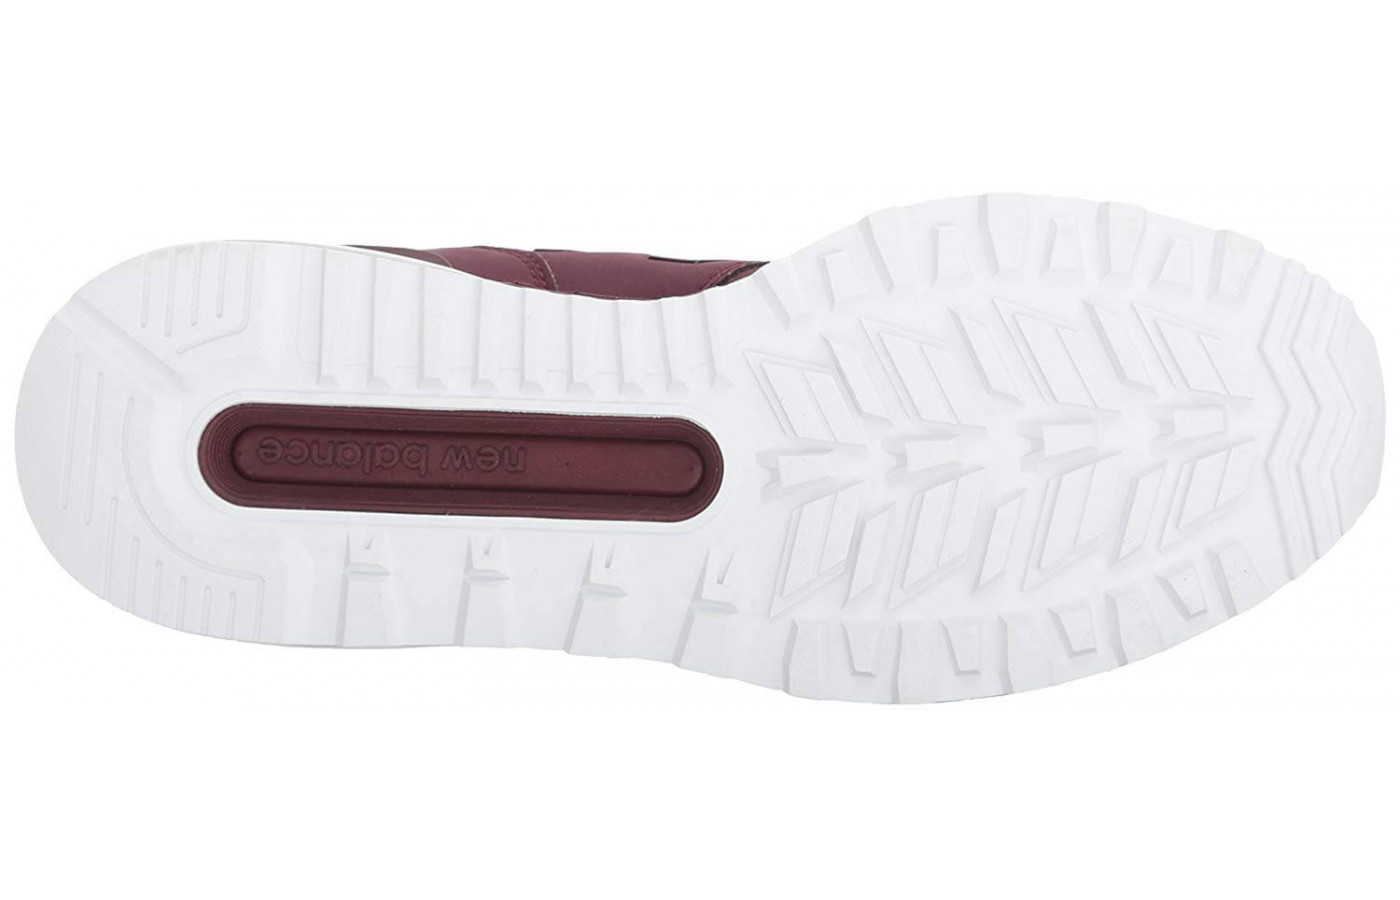 The 574 Sport's rubber outsole provides a strong grip on everyday surfaces